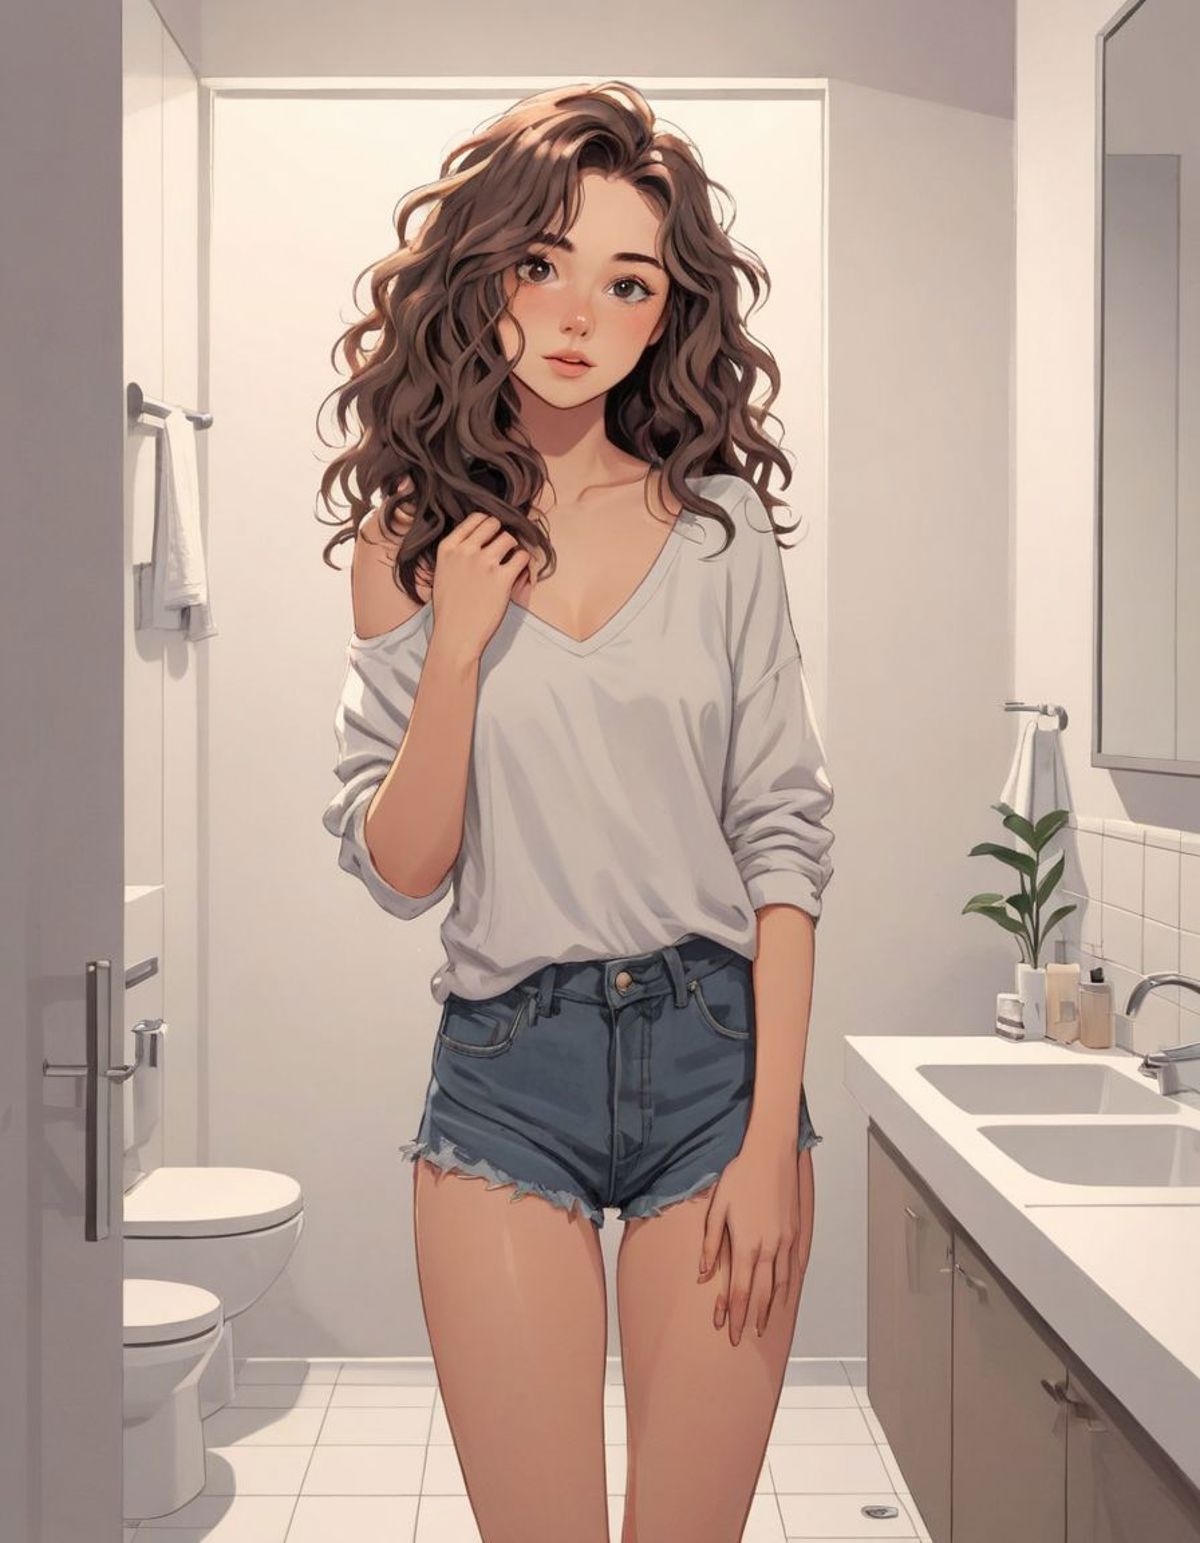 A cartoon image of a woman in a white shirt and blue shorts standing in a bathroom.